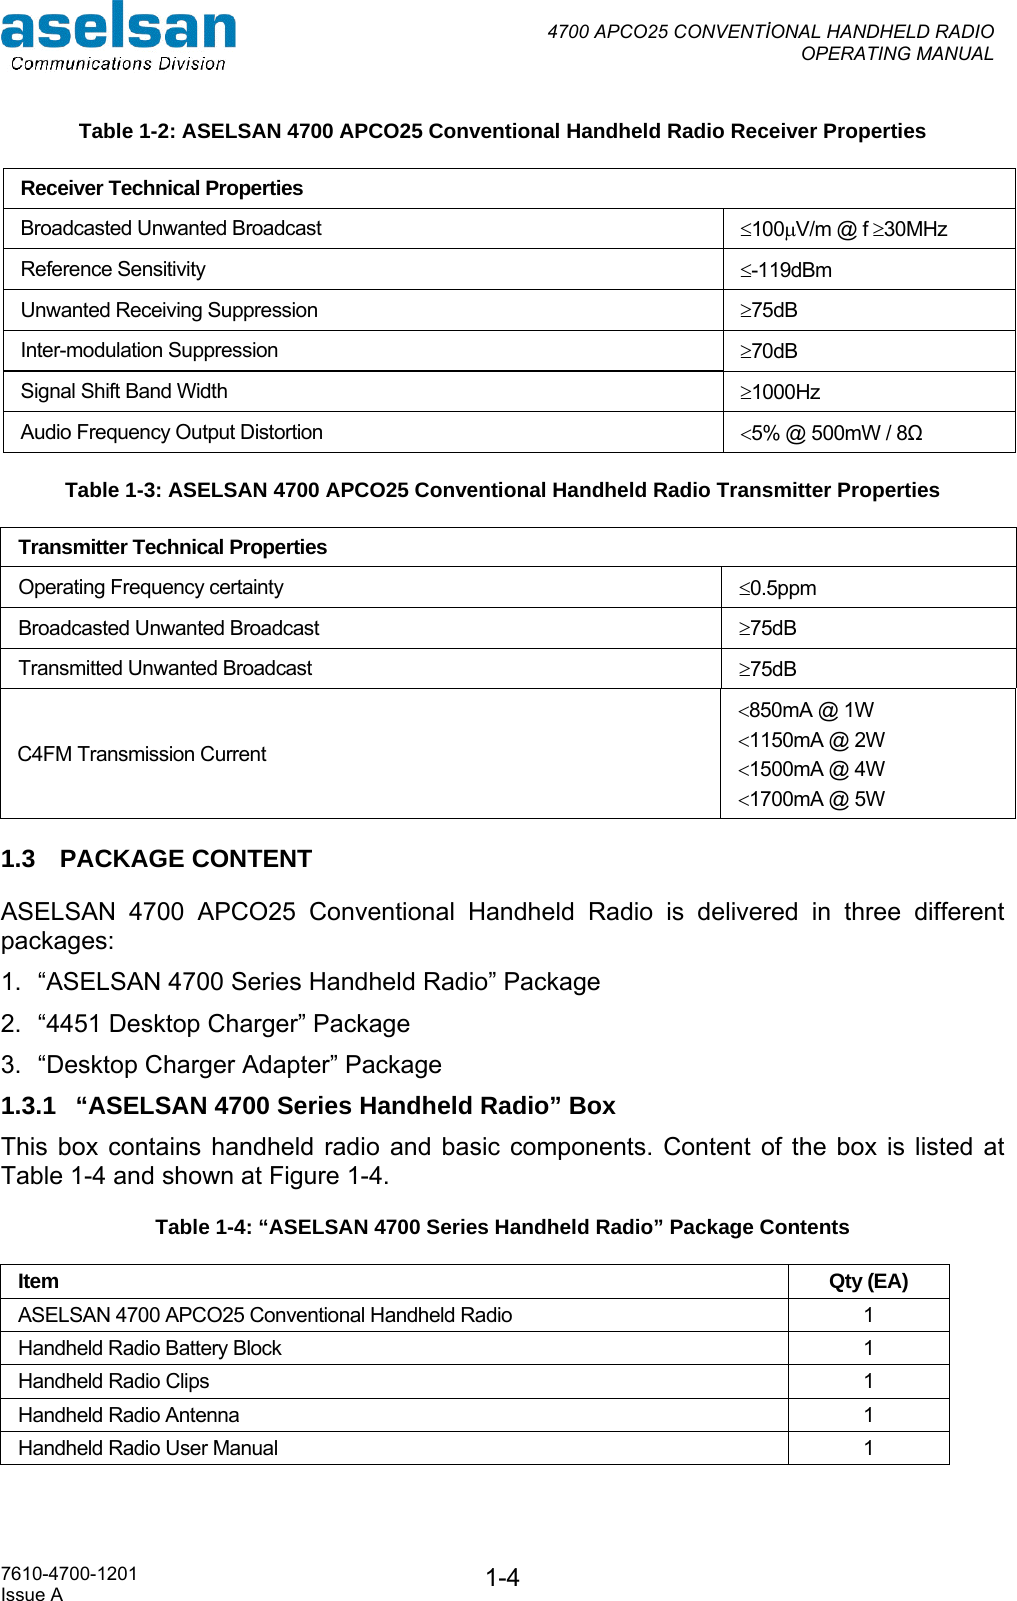  4700 APCO25 CONVENTİONAL HANDHELD RADIO  OPERATING MANUAL   7610-4700-1201 Issue A  1-4Table 1-2: ASELSAN 4700 APCO25 Conventional Handheld Radio Receiver Properties Receiver Technical Properties  Broadcasted Unwanted Broadcast   ≤100µV/m @ f ≥30MHz Reference Sensitivity  ≤-119dBm  Unwanted Receiving Suppression  ≥75dB  Inter-modulation Suppression  ≥70dB  Signal Shift Band Width  ≥1000Hz  Audio Frequency Output Distortion  &lt;5% @ 500mW / 8Ω  Table 1-3: ASELSAN 4700 APCO25 Conventional Handheld Radio Transmitter Properties Transmitter Technical Properties Operating Frequency certainty  ≤0.5ppm Broadcasted Unwanted Broadcast  ≥75dB Transmitted Unwanted Broadcast  ≥75dB C4FM Transmission Current &lt;850mA @ 1W &lt;1150mA @ 2W &lt;1500mA @ 4W &lt;1700mA @ 5W 1.3 PACKAGE CONTENT ASELSAN 4700 APCO25 Conventional Handheld Radio is delivered in three different packages: 1.  “ASELSAN 4700 Series Handheld Radio” Package 2.  “4451 Desktop Charger” Package  3.  “Desktop Charger Adapter” Package 1.3.1  “ASELSAN 4700 Series Handheld Radio” Box This box contains handheld radio and basic components. Content of the box is listed at Table 1-4 and shown at Figure 1-4. Table 1-4: “ASELSAN 4700 Series Handheld Radio” Package Contents Item  Qty (EA) ASELSAN 4700 APCO25 Conventional Handheld Radio  1 Handheld Radio Battery Block  1 Handheld Radio Clips  1 Handheld Radio Antenna  1 Handheld Radio User Manual  1 